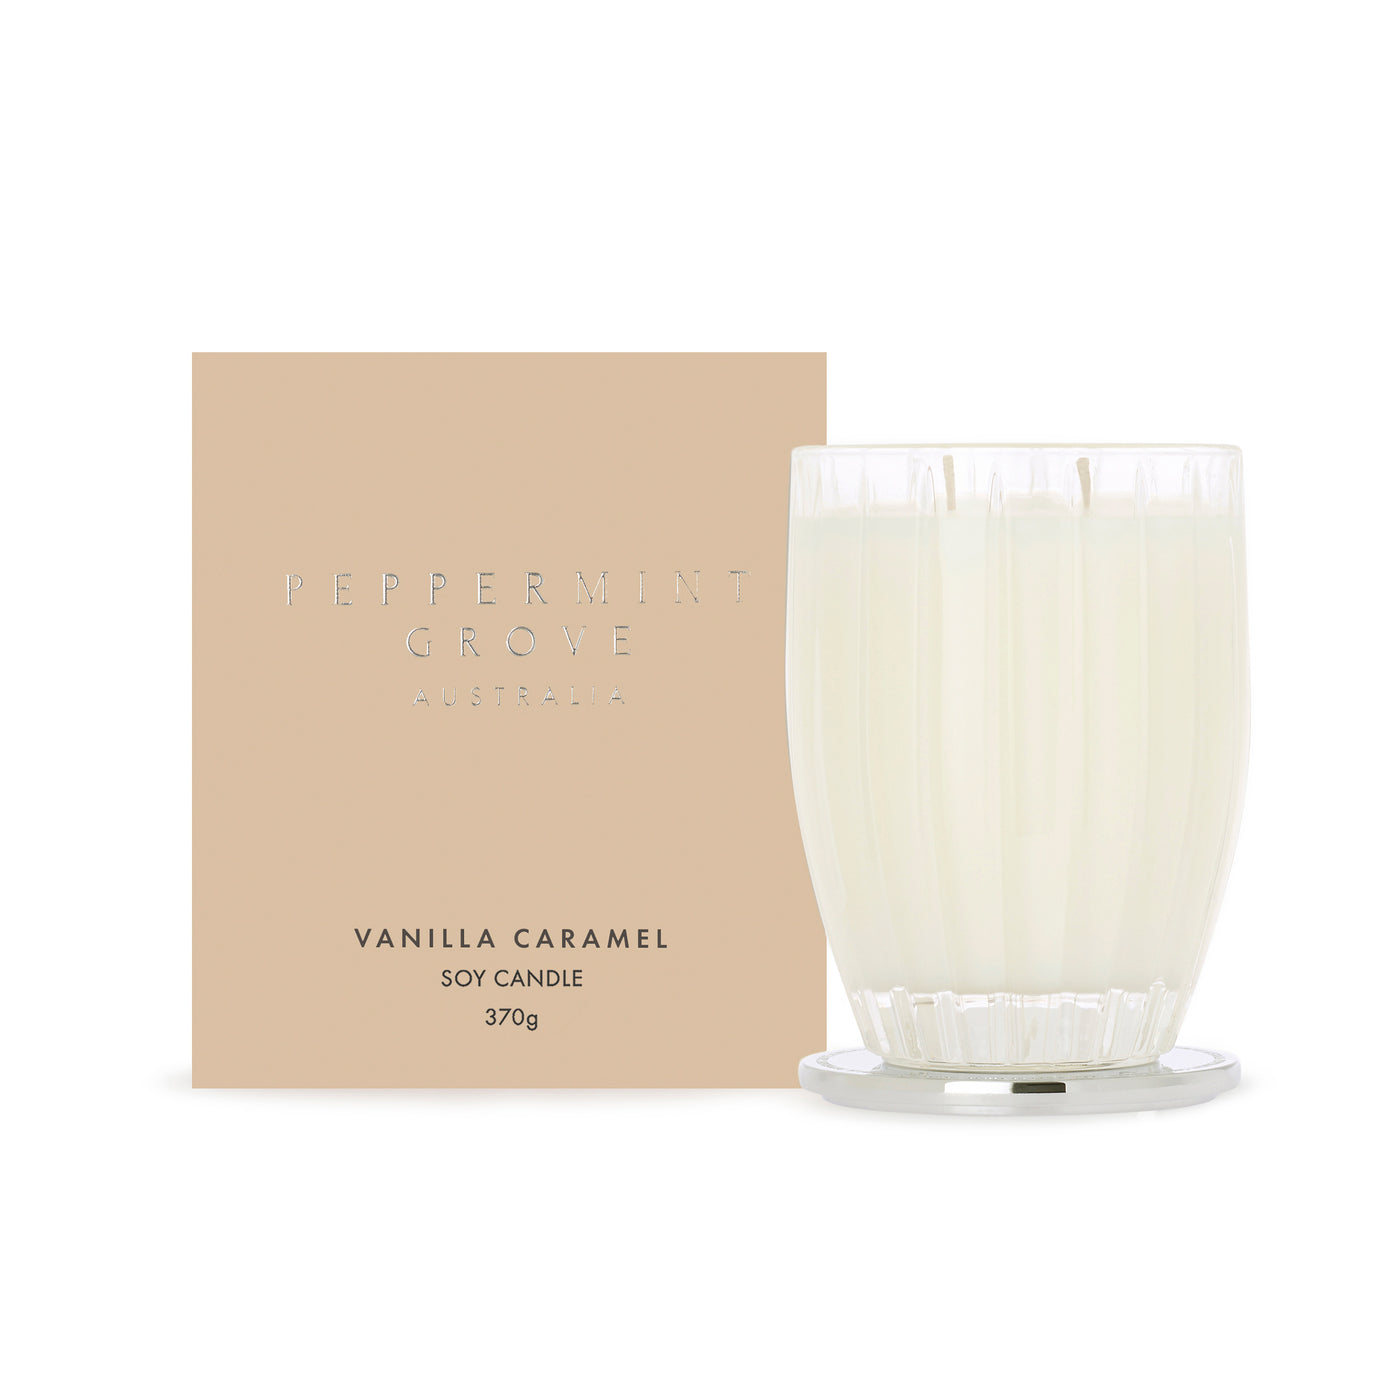 Vanilla Caramel Soy Candle- Peppermint Grove